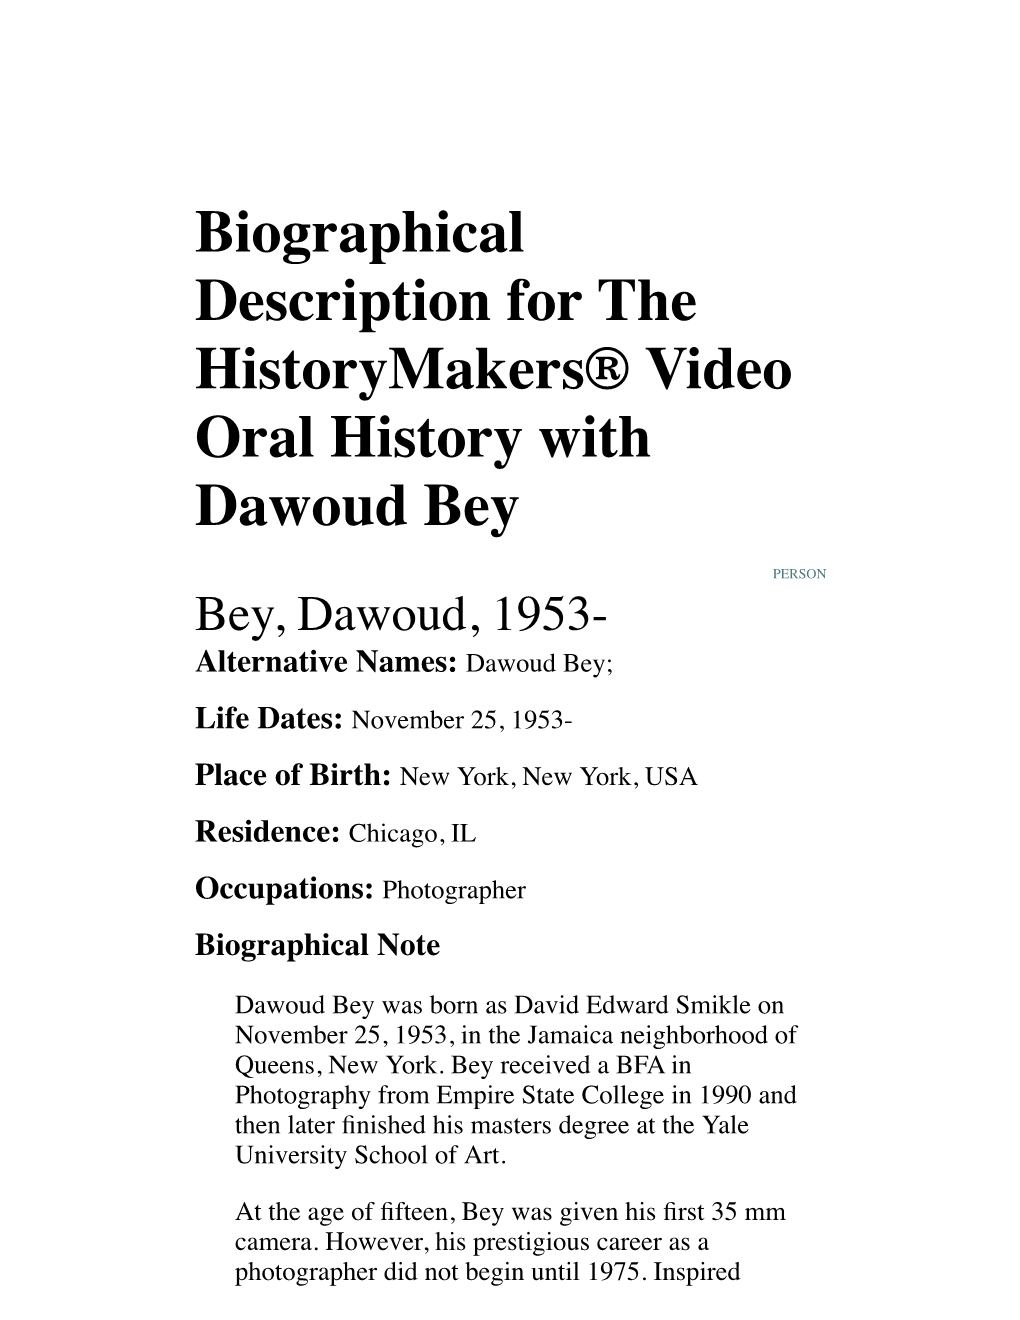 Biographical Description for the Historymakers® Video Oral History with Dawoud Bey